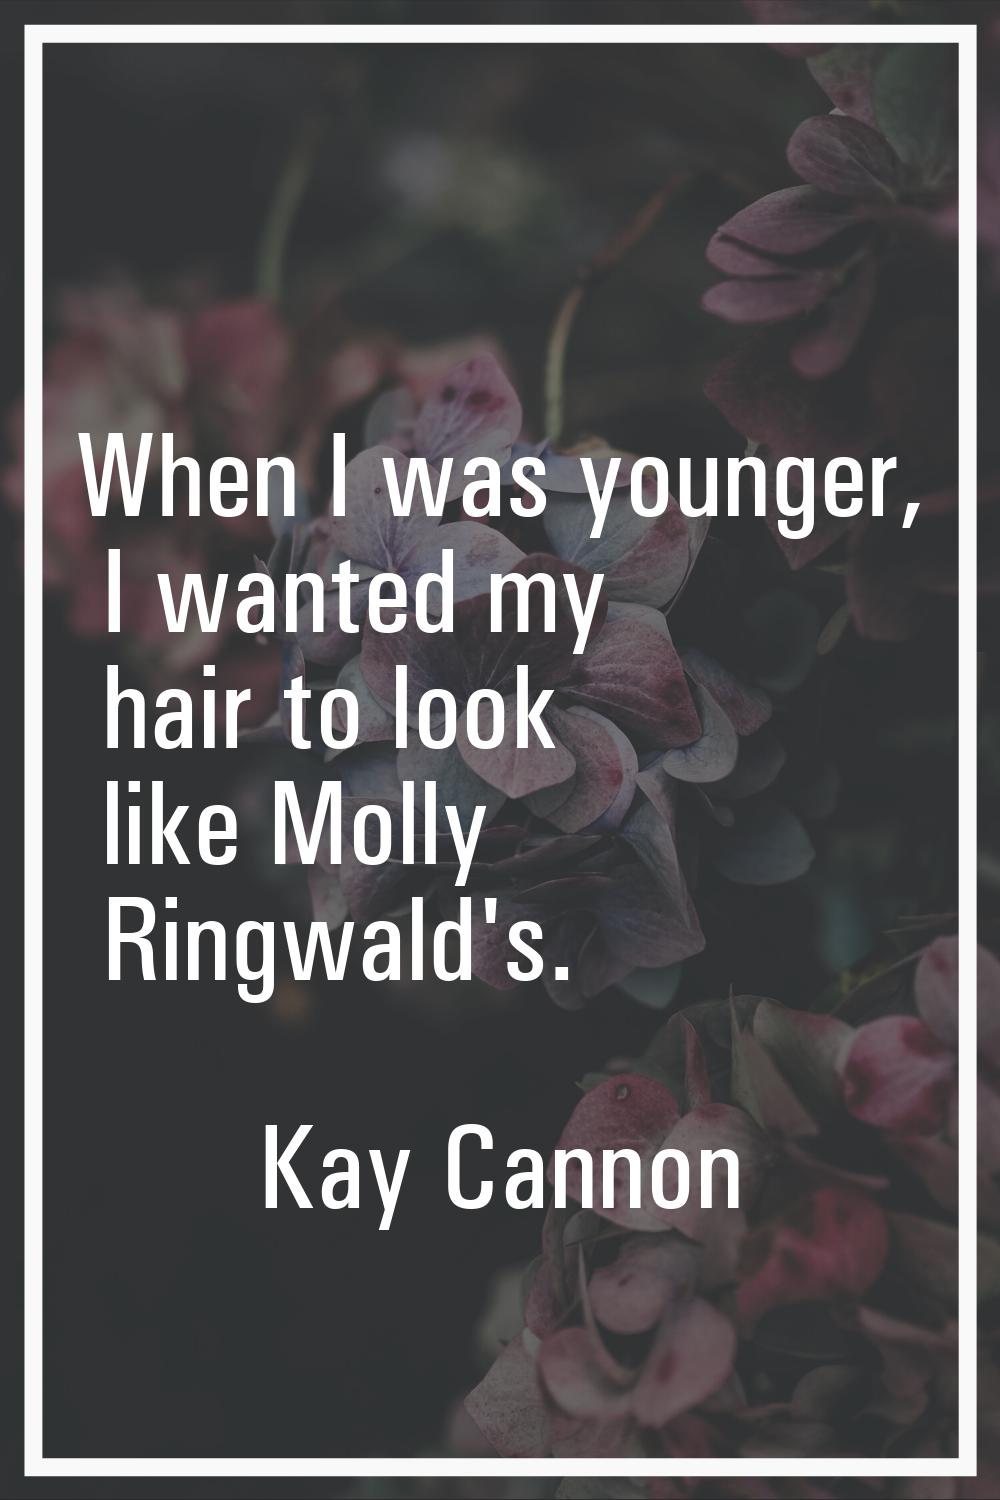 When I was younger, I wanted my hair to look like Molly Ringwald's.